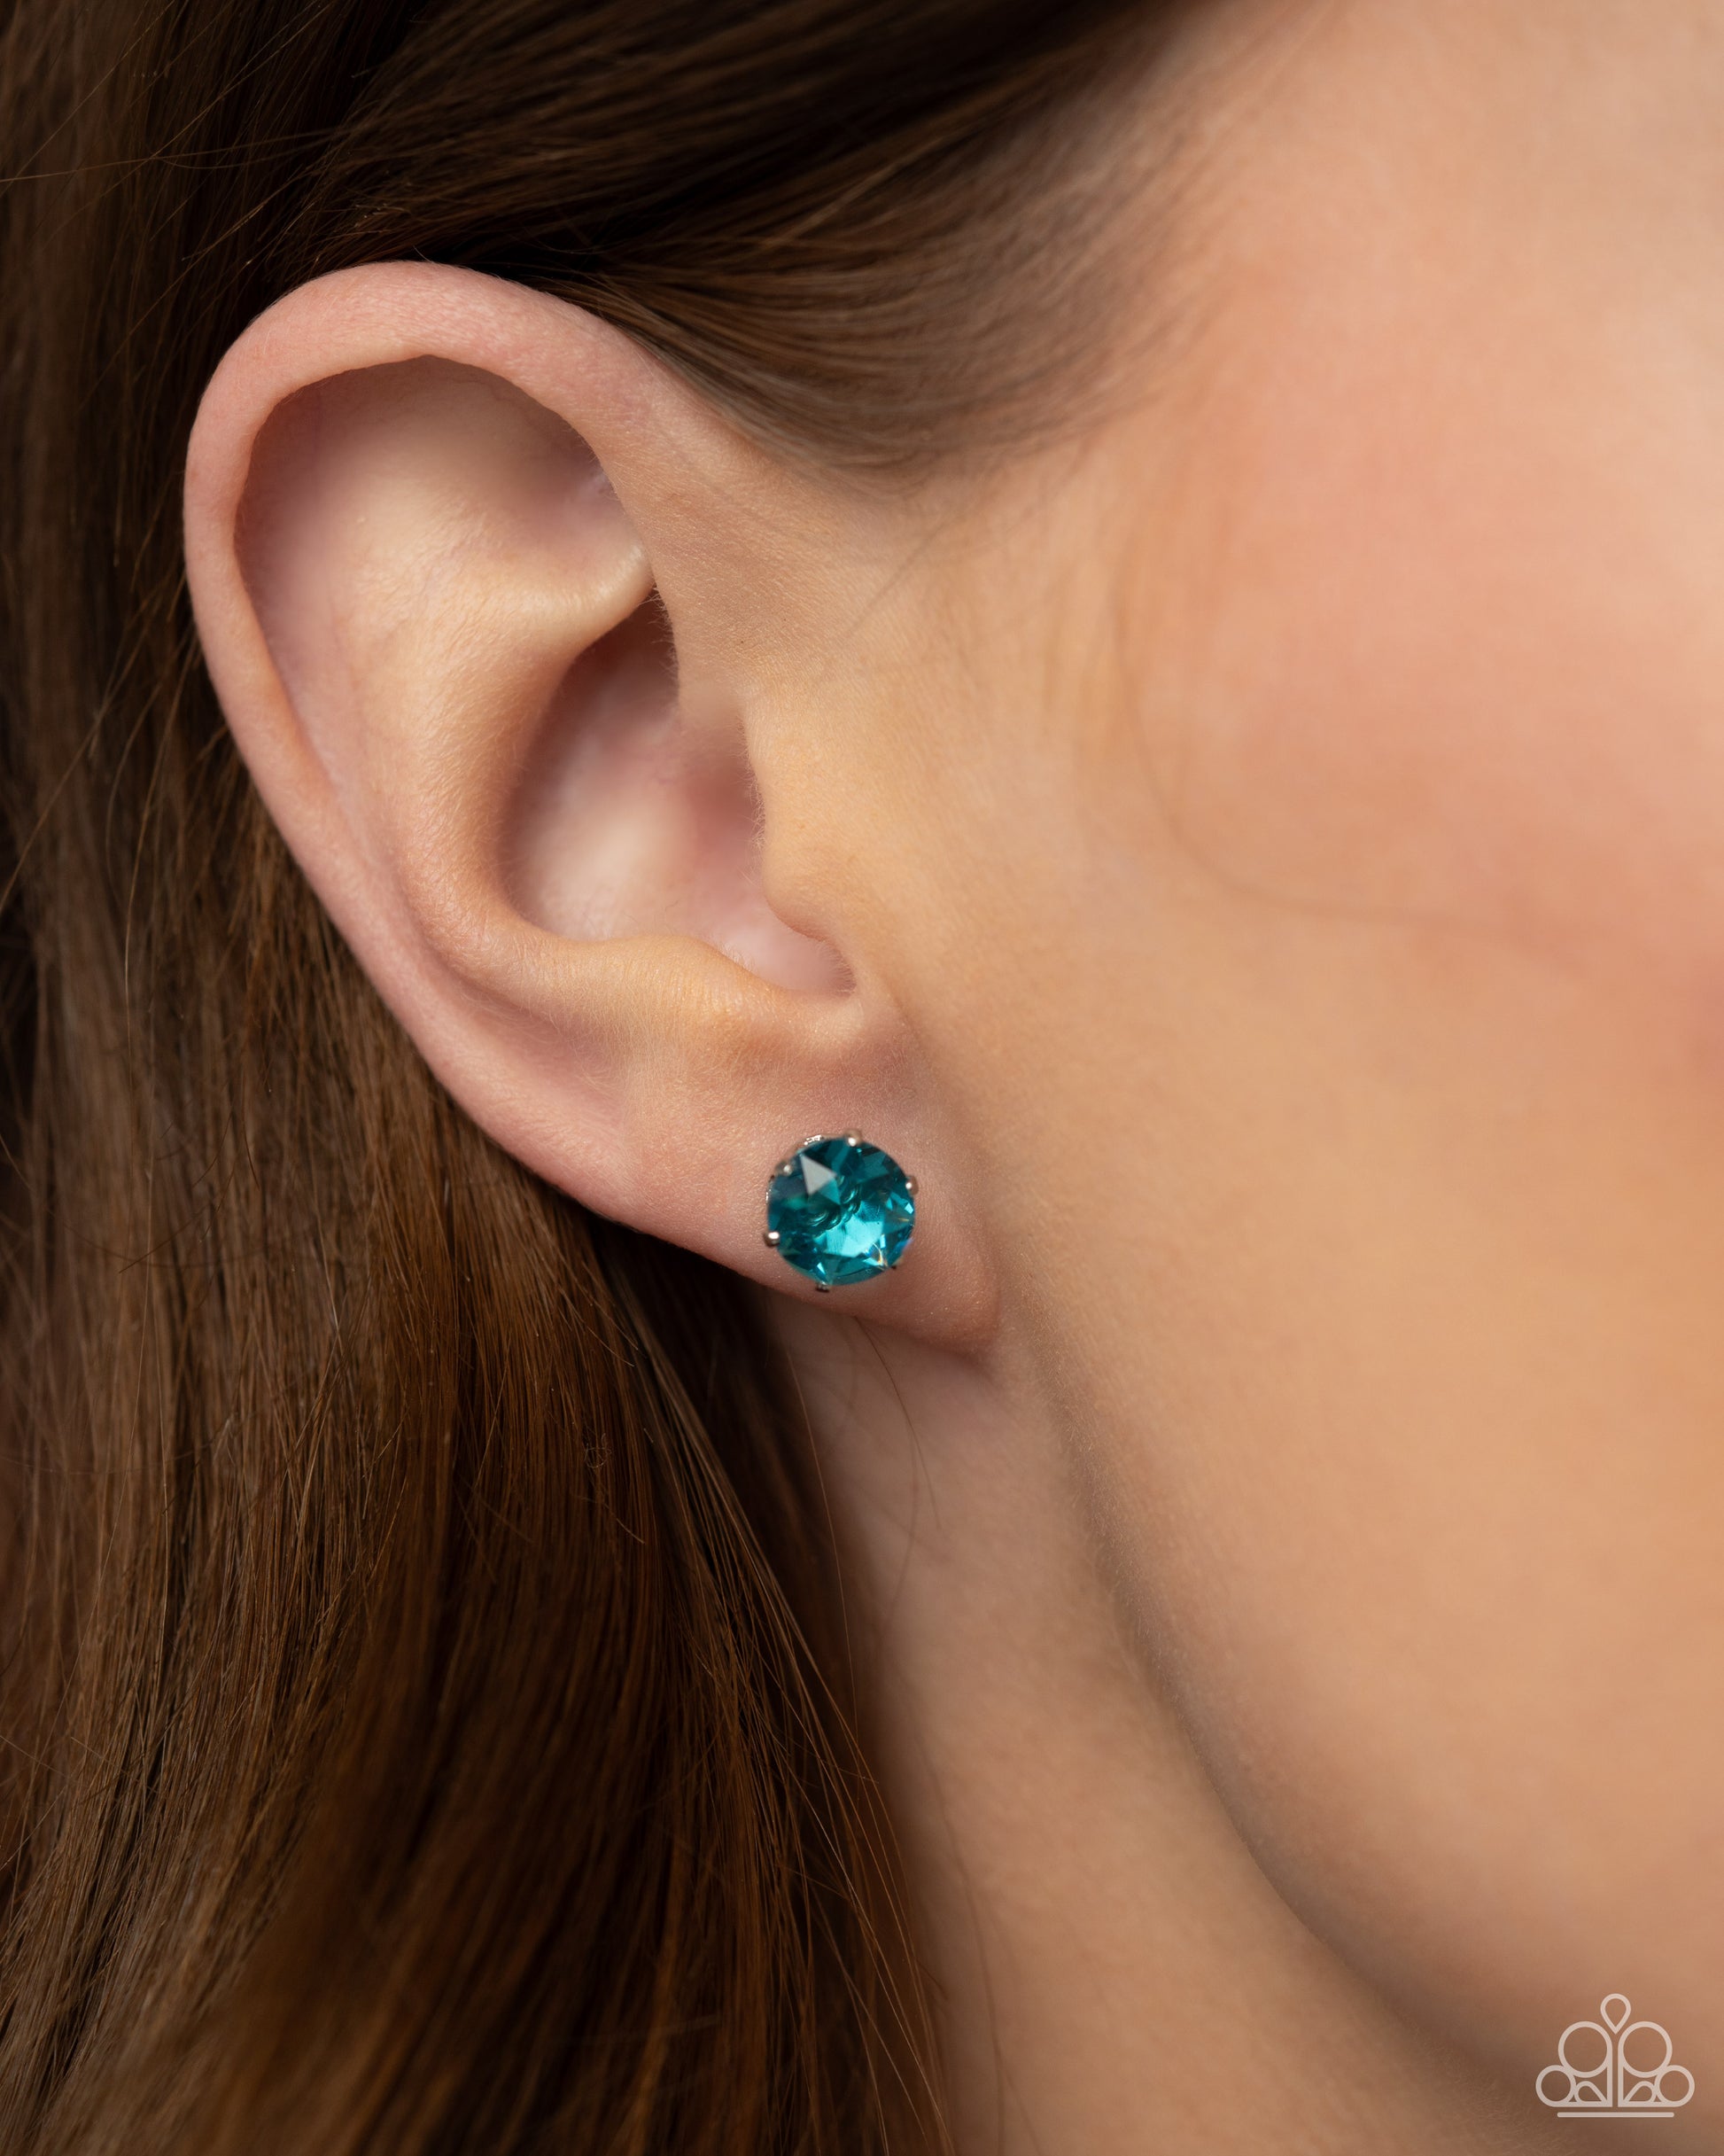 Breathtaking Birthstone Turquoise Rhinestone Post Earring - Paparazzi Accessories  A sparkling turquoise rhinestone is nestled inside a classic silver frame for a beautiful birthstone-inspired display. Earring attaches to a standard post fitting.  Sold as one pair of post earrings.  P5PO-BLXX-175UG